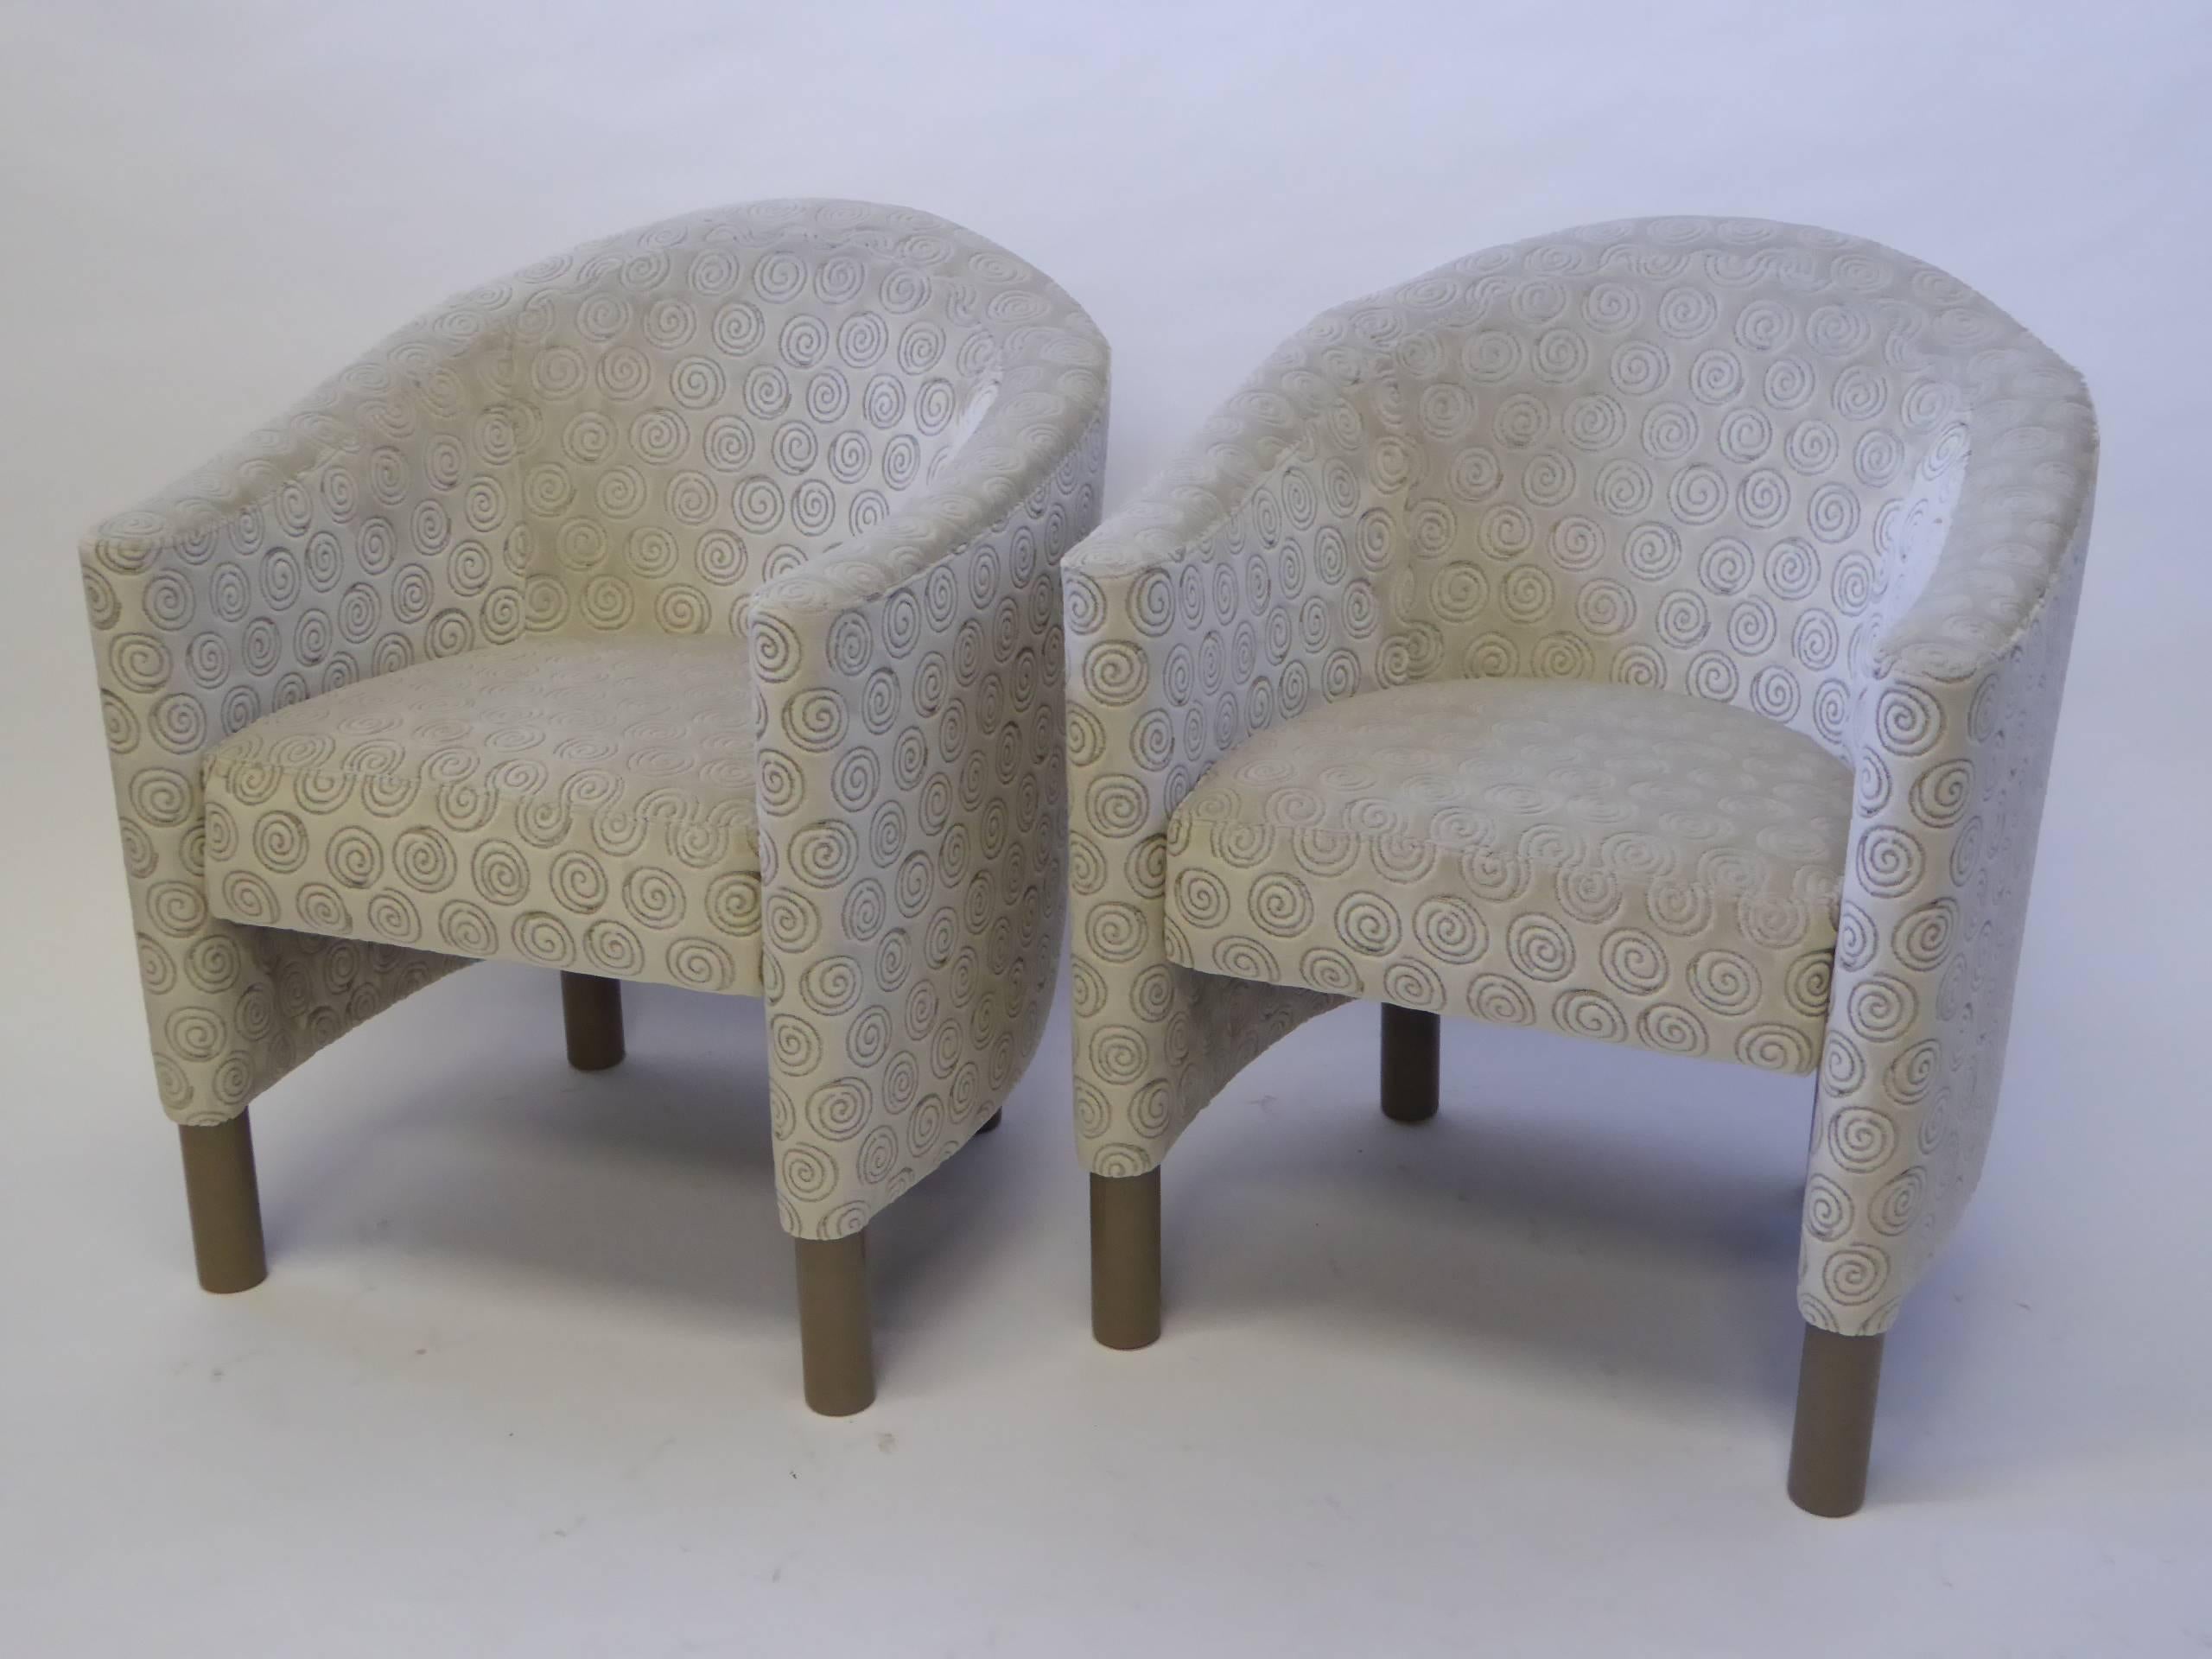 REDUCED FROM $2,500....Great scale and style in this pair of club chairs by Brayton International Collection. Newly reupholstered in a luxe neutral swirl design velvet. Armed lounge chairs or tub chairs. Wonderful fat pencil legs. Price is for the